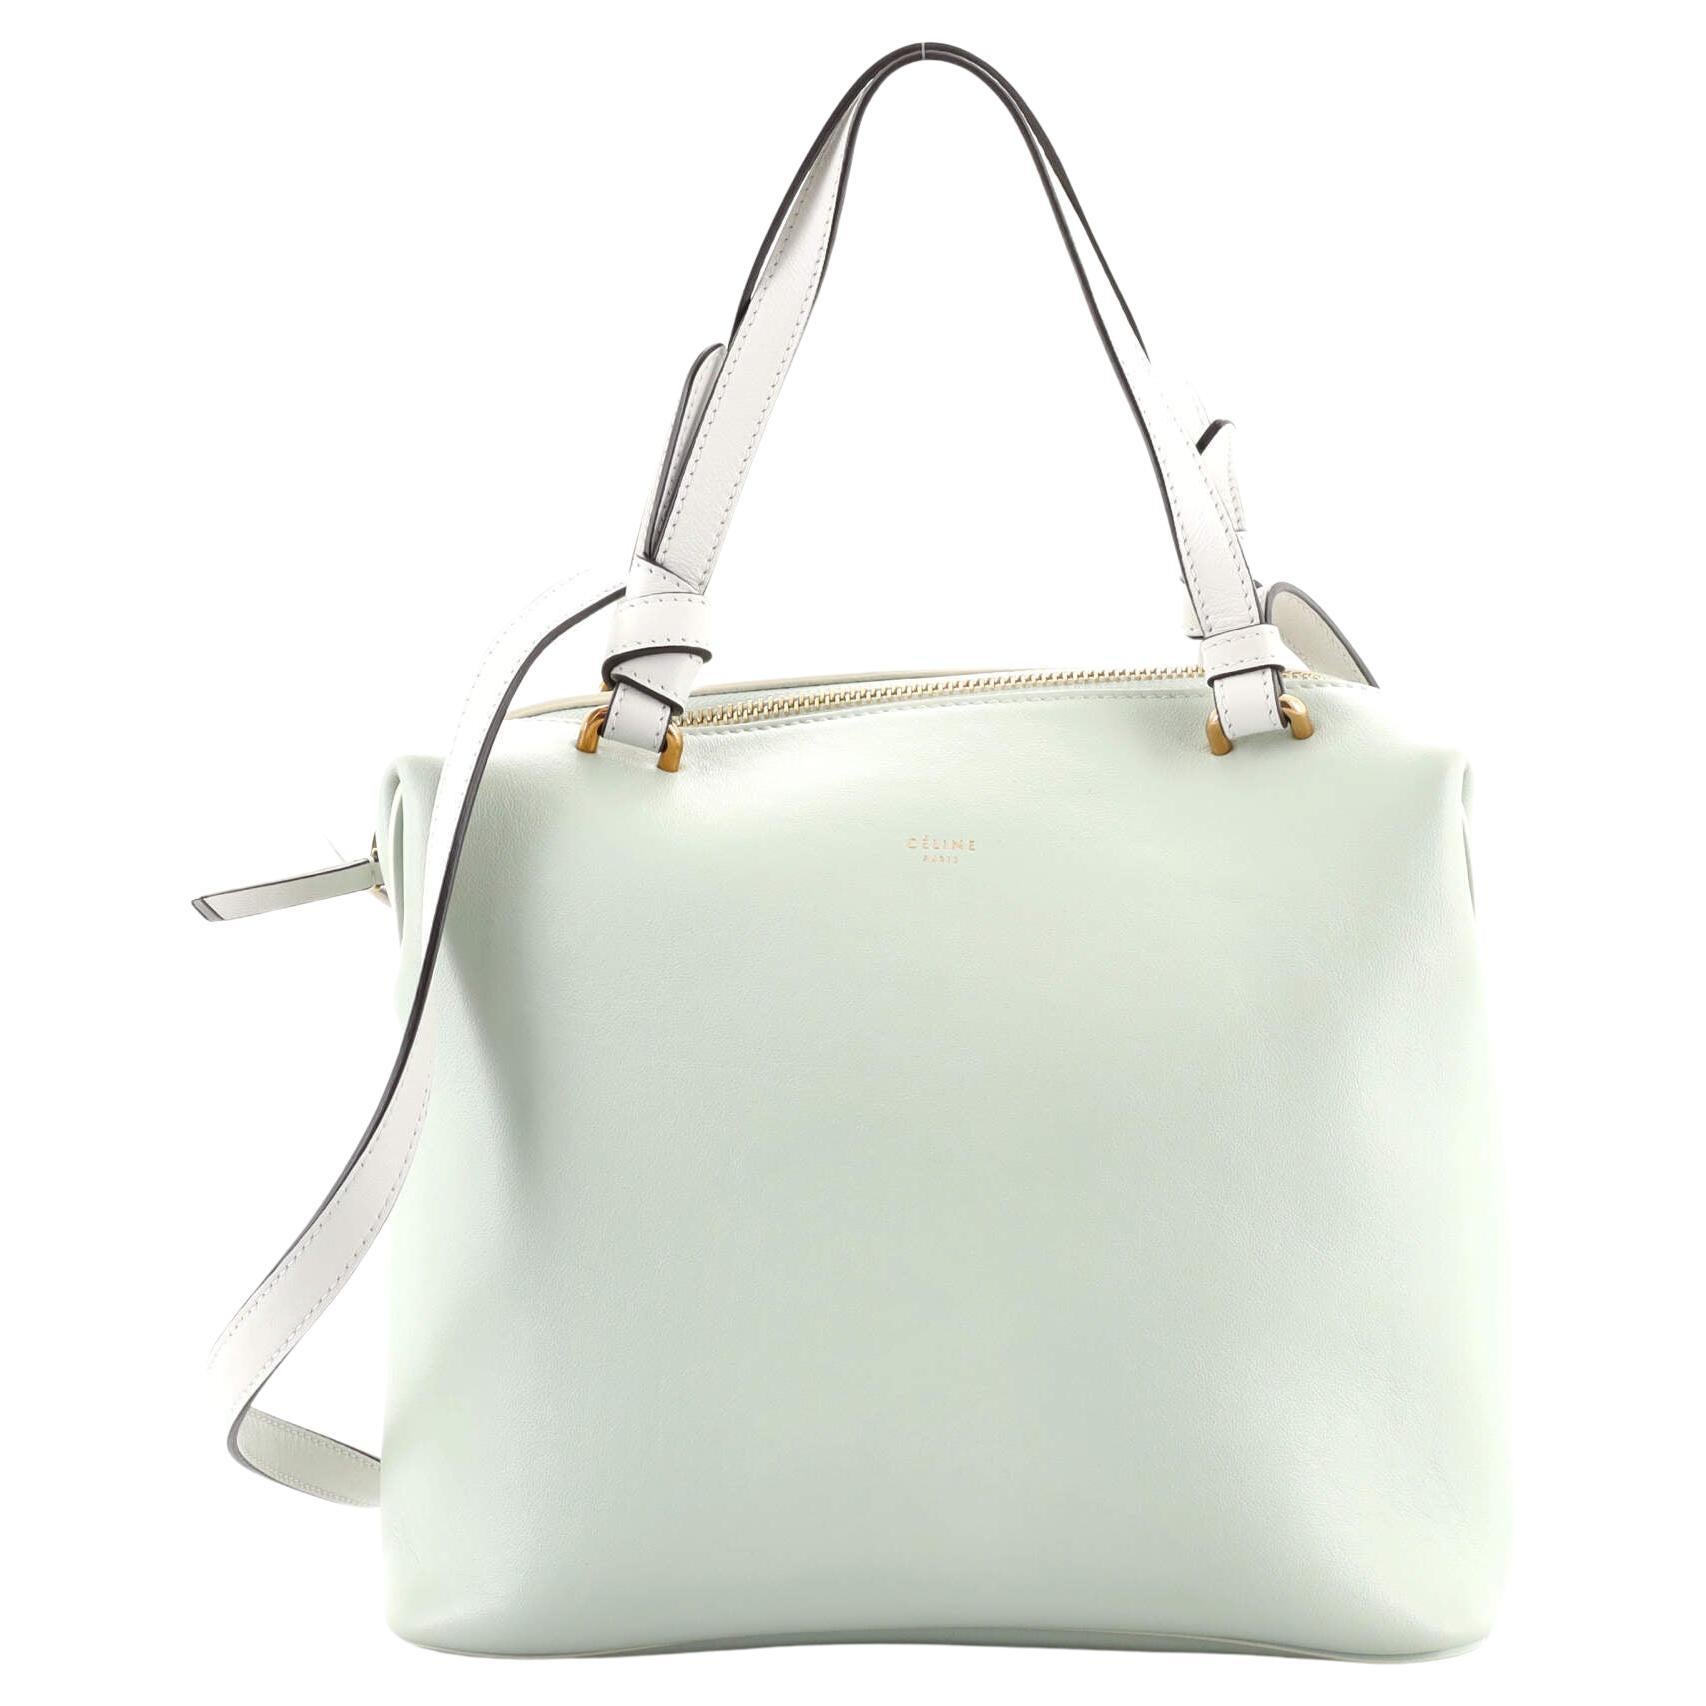 LOUIS VUITTON 'City Steamer MM' Bag in Tricolor Smooth Leather at 1stDibs